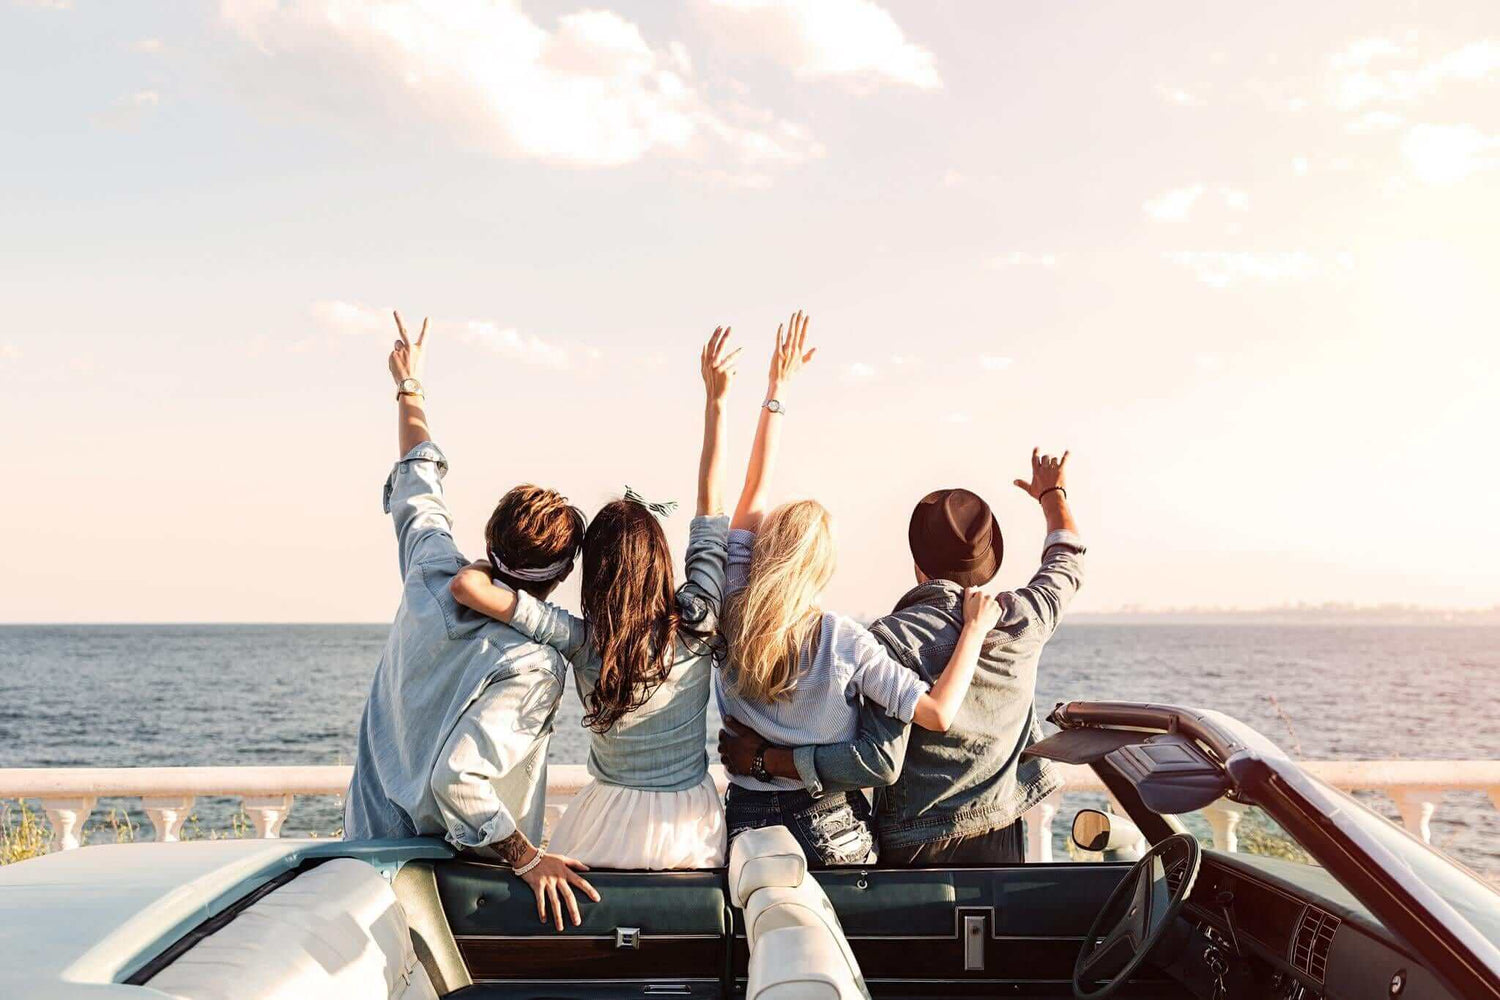 friends standing next to car looking over the water with hands raised in excitement